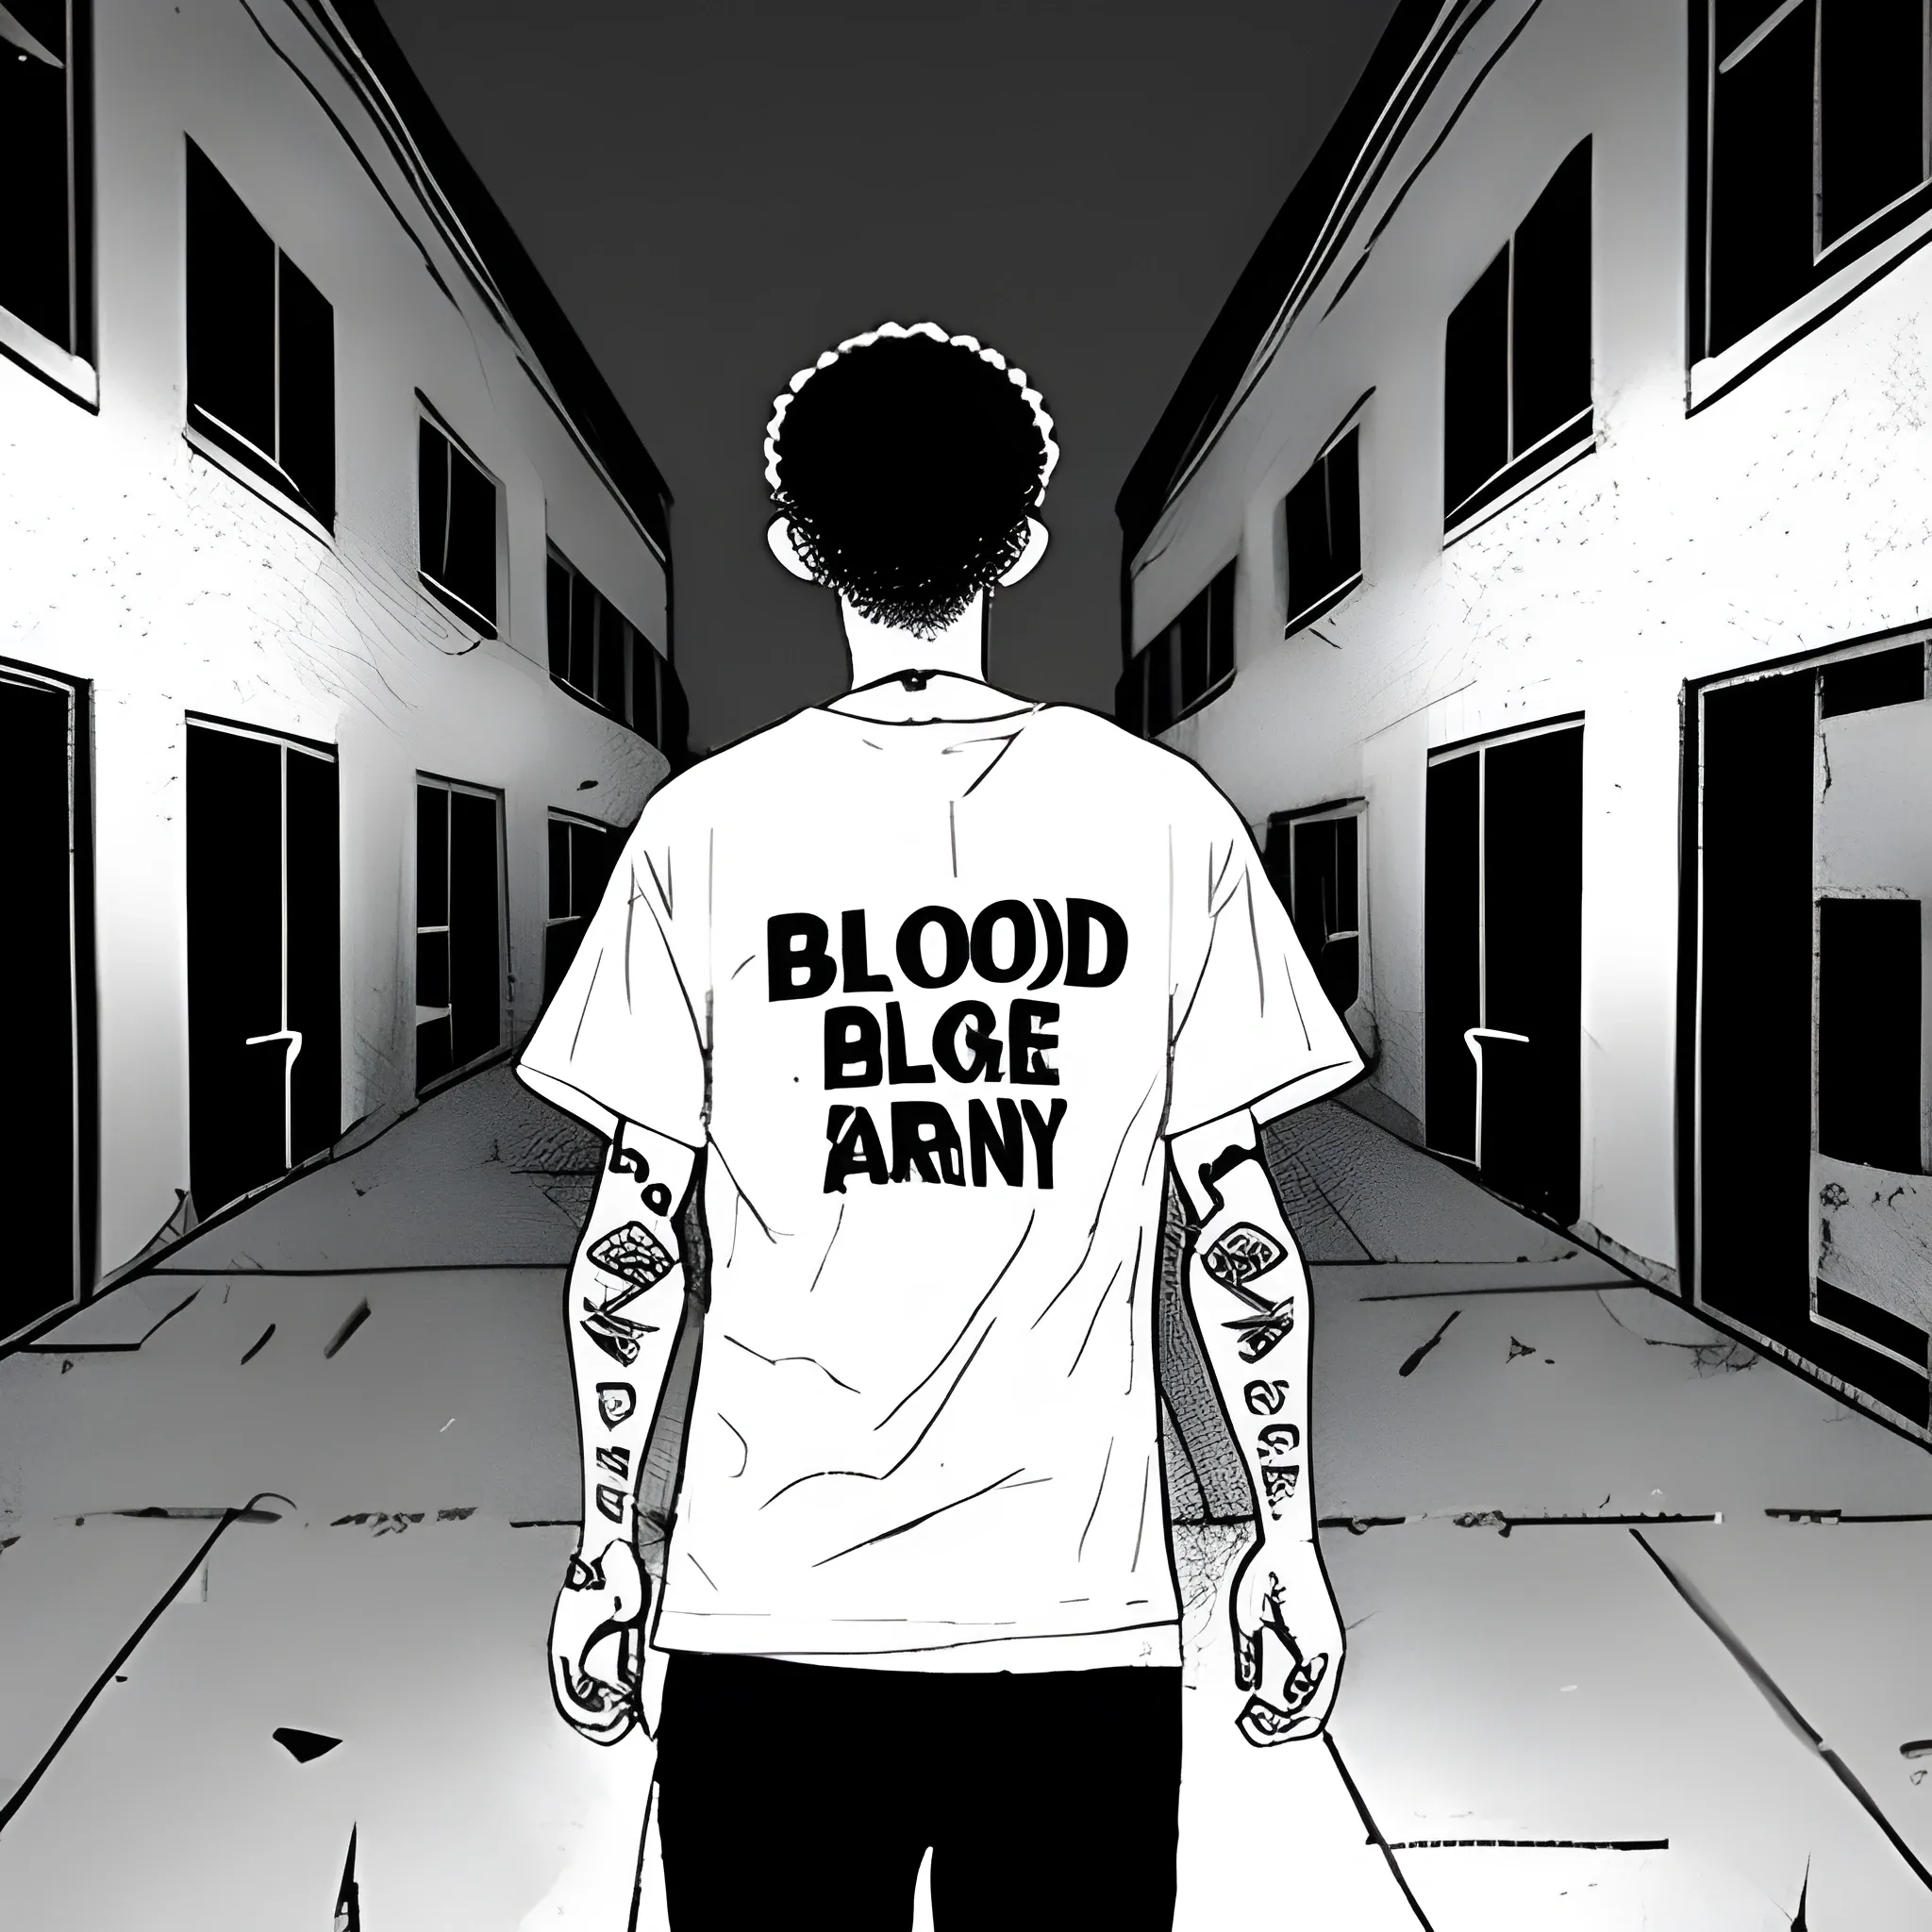 A 21-year-old blood gang member walking backwards through an American housing project, at night.  With Moving Backwards written on his t-shirt in english.  Cartoon

